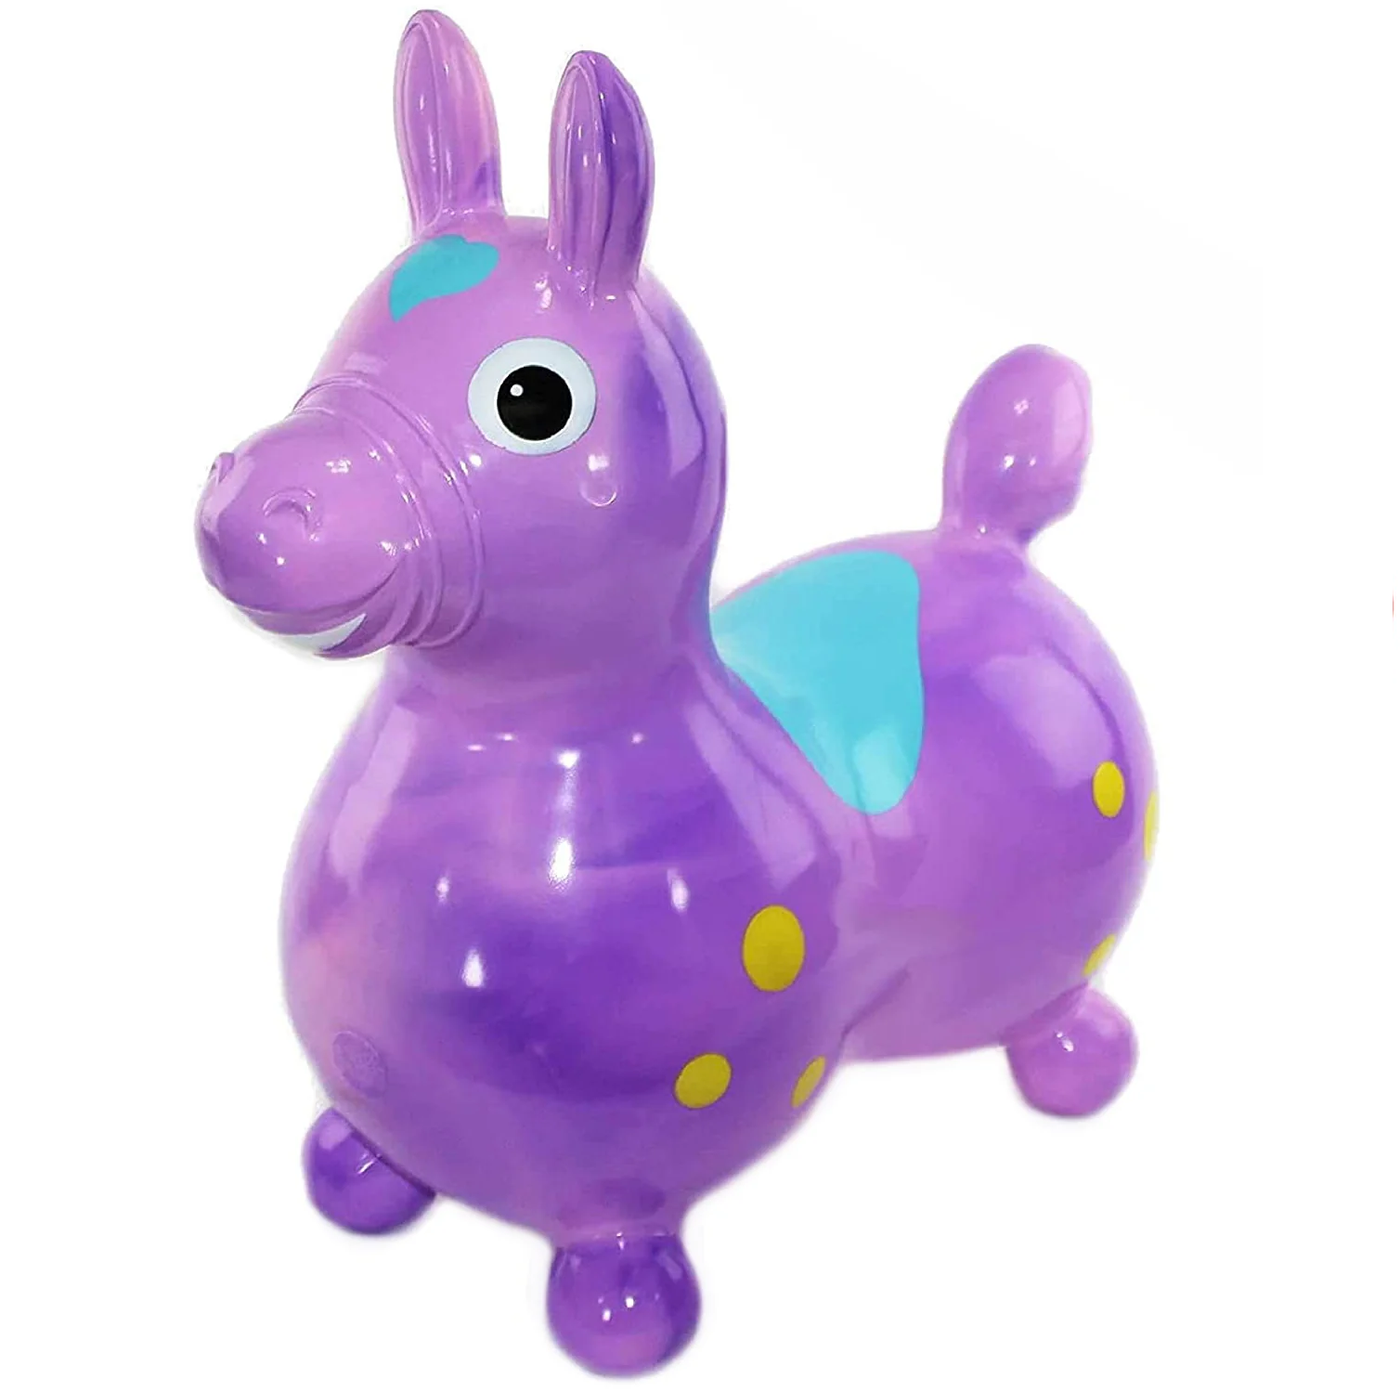 Rody Hoppy Horse - Choose Your Color